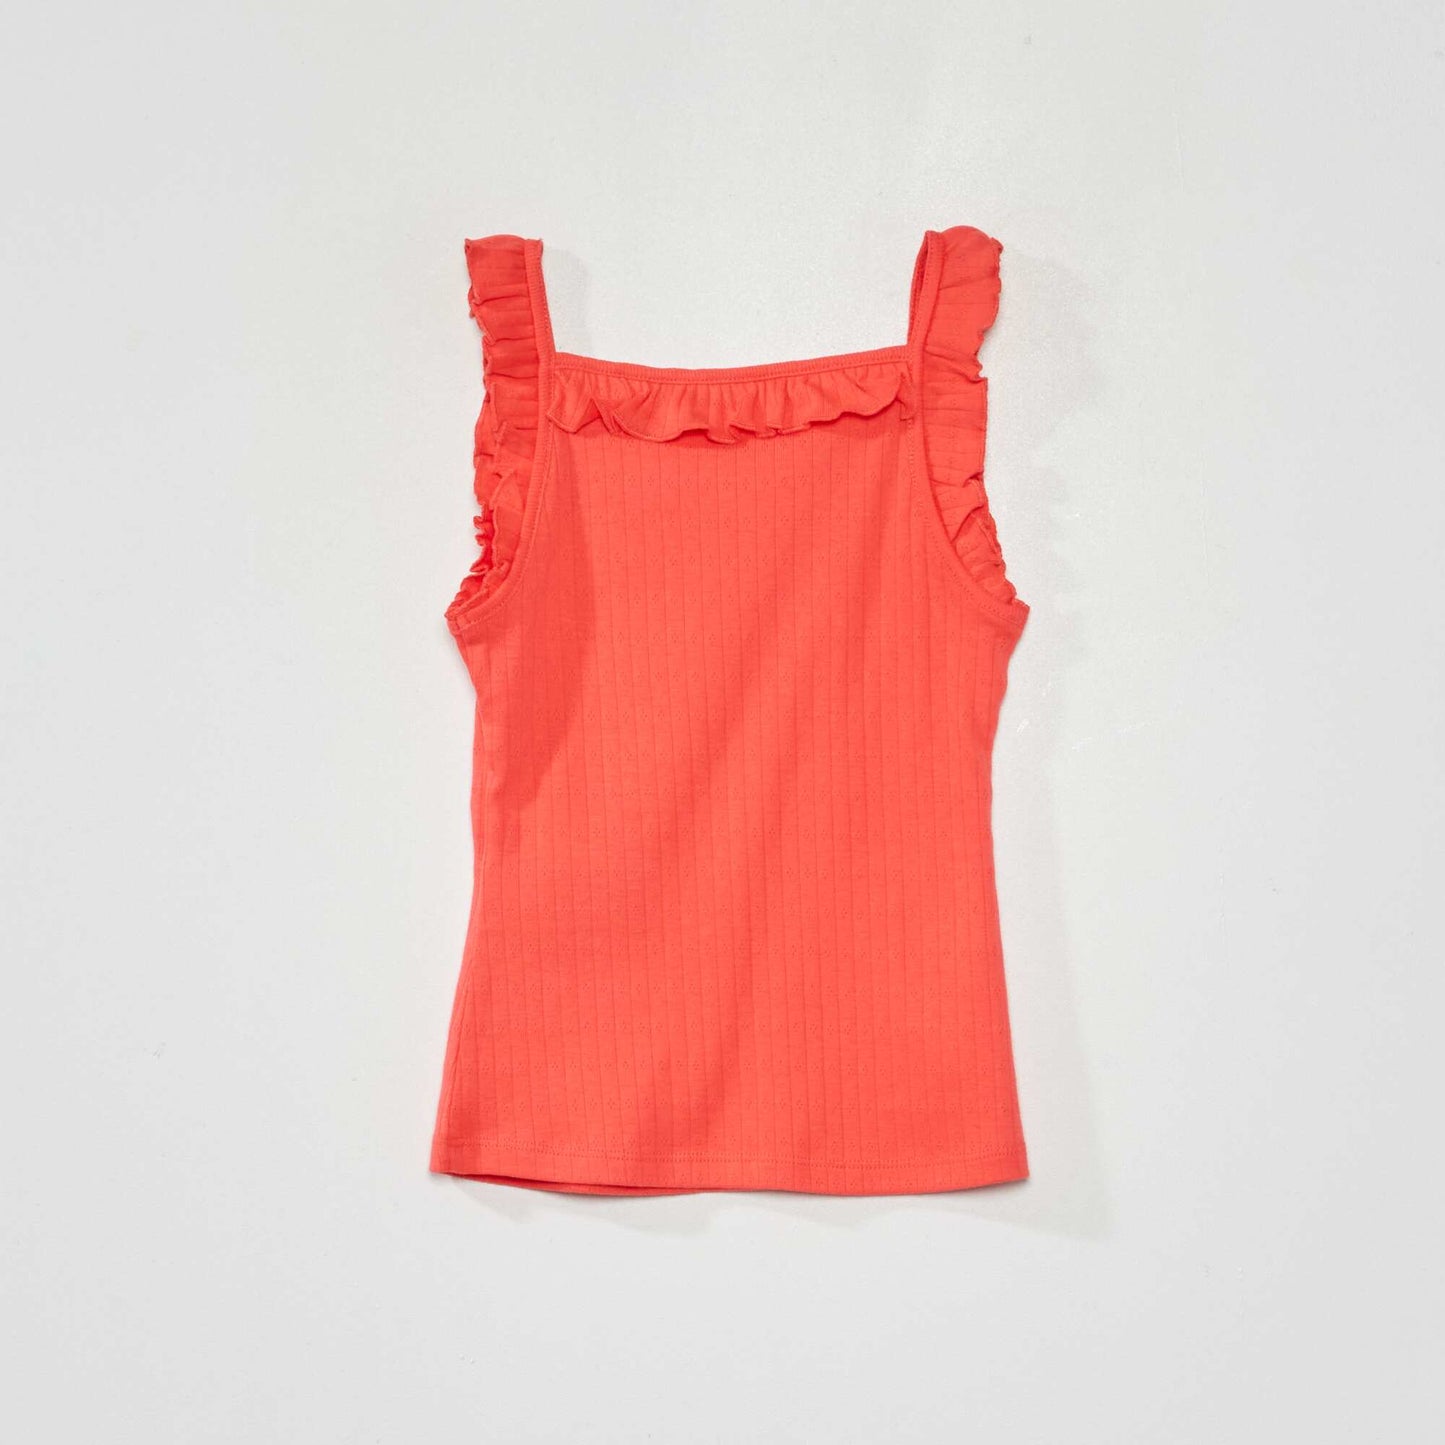 Pointelle vest top with ruffles Red